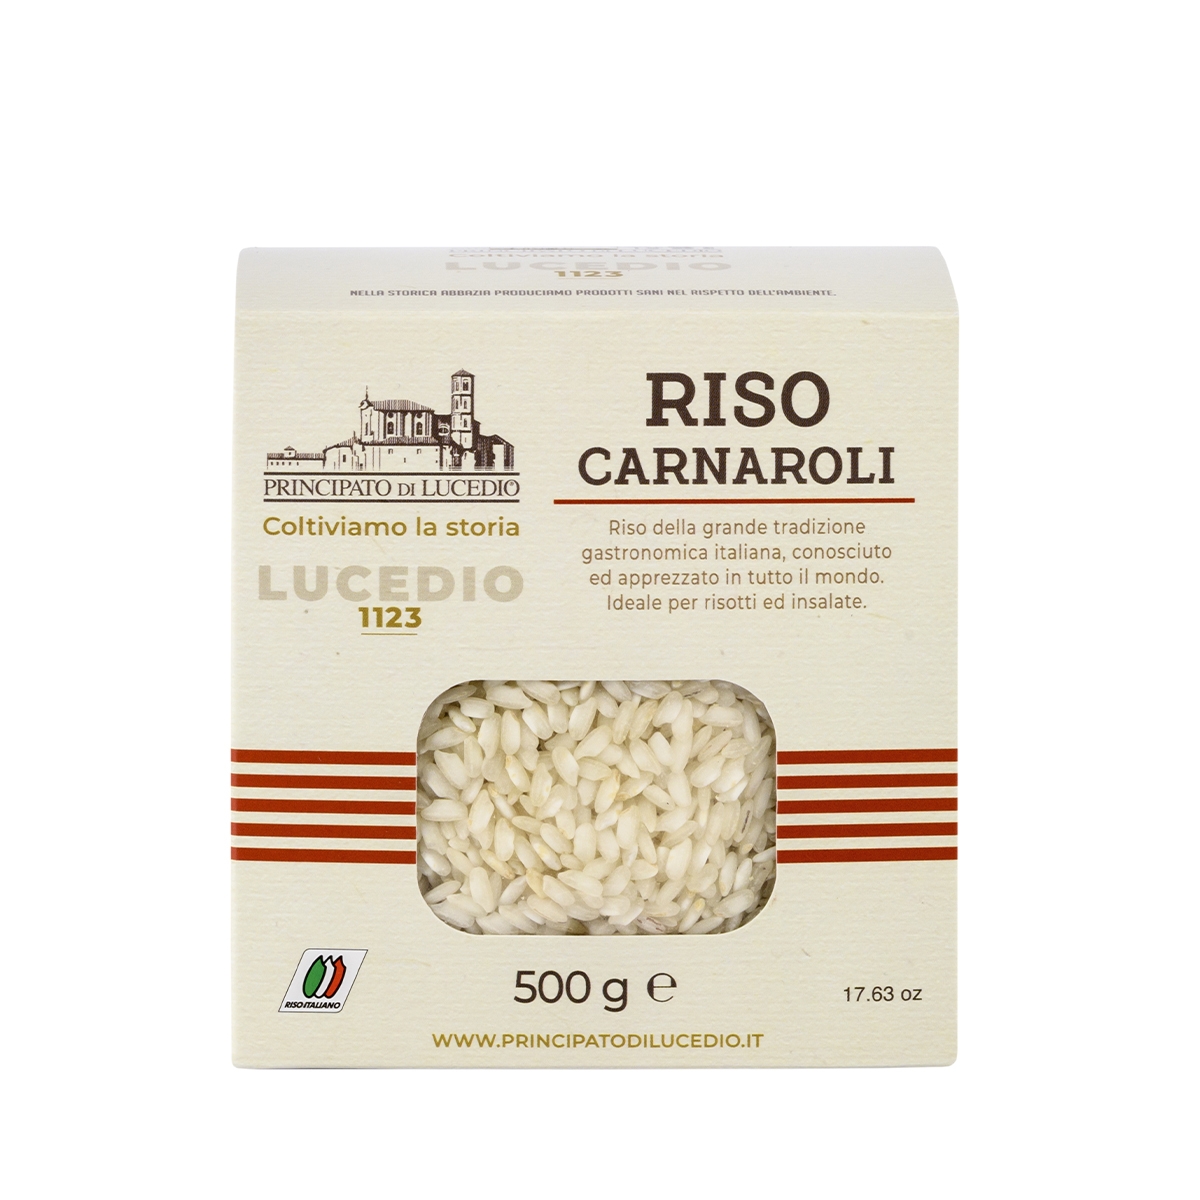 Carnaroli rice - 500 g - Packaged in a protective atmosphere and cardboard box